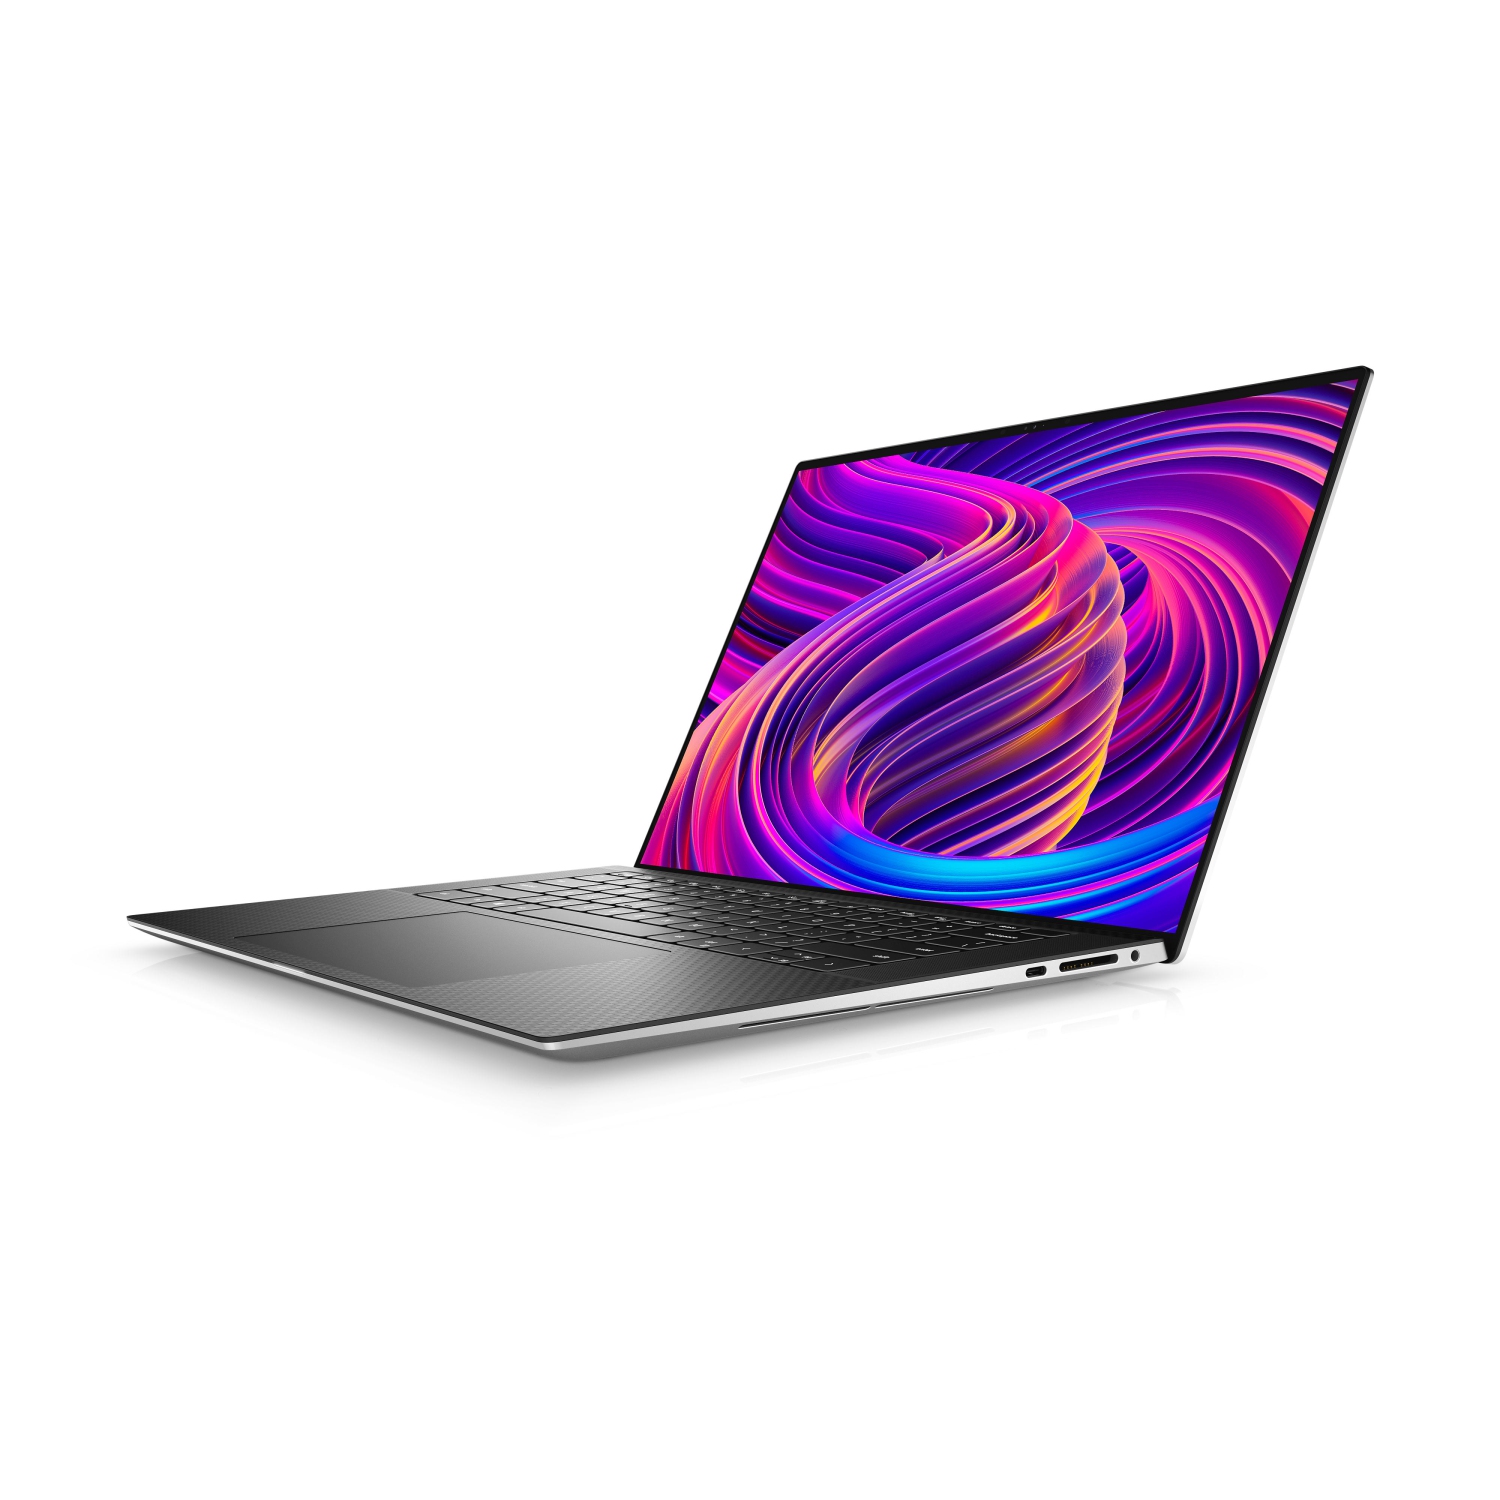 Refurbished (Excellent) - Dell XPS 15 9510 Laptop (2021), 15.6" 4K Touch, Core i9 - 512GB SSD - 32GB RAM - 3050 Ti, 8 Cores @ 4.9 GHz - 11th Gen CPU Certified Refurbished